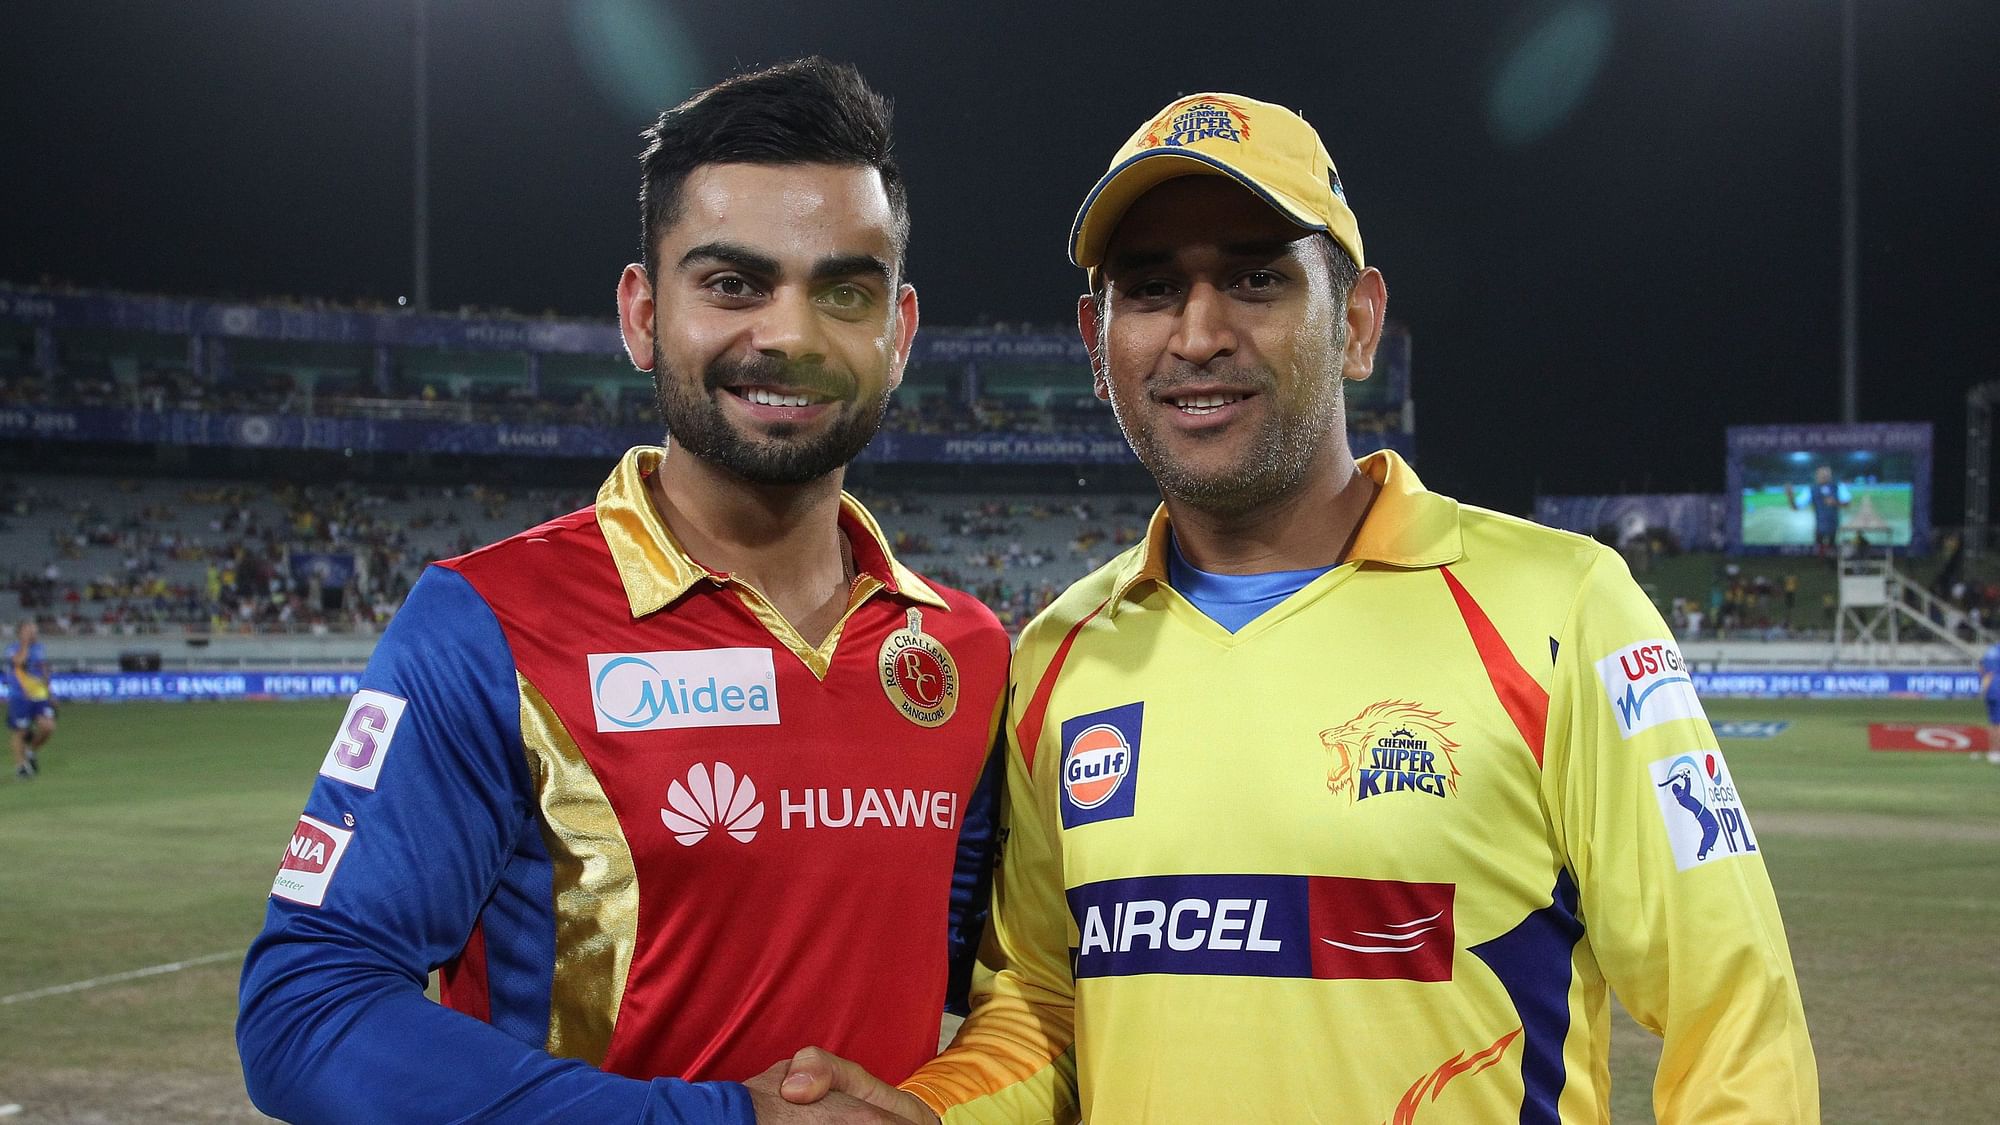 IPL 2019 is scheduled to start with a fixture between defending champions Chennai Super Kings and Royal Challengers Bangalore.